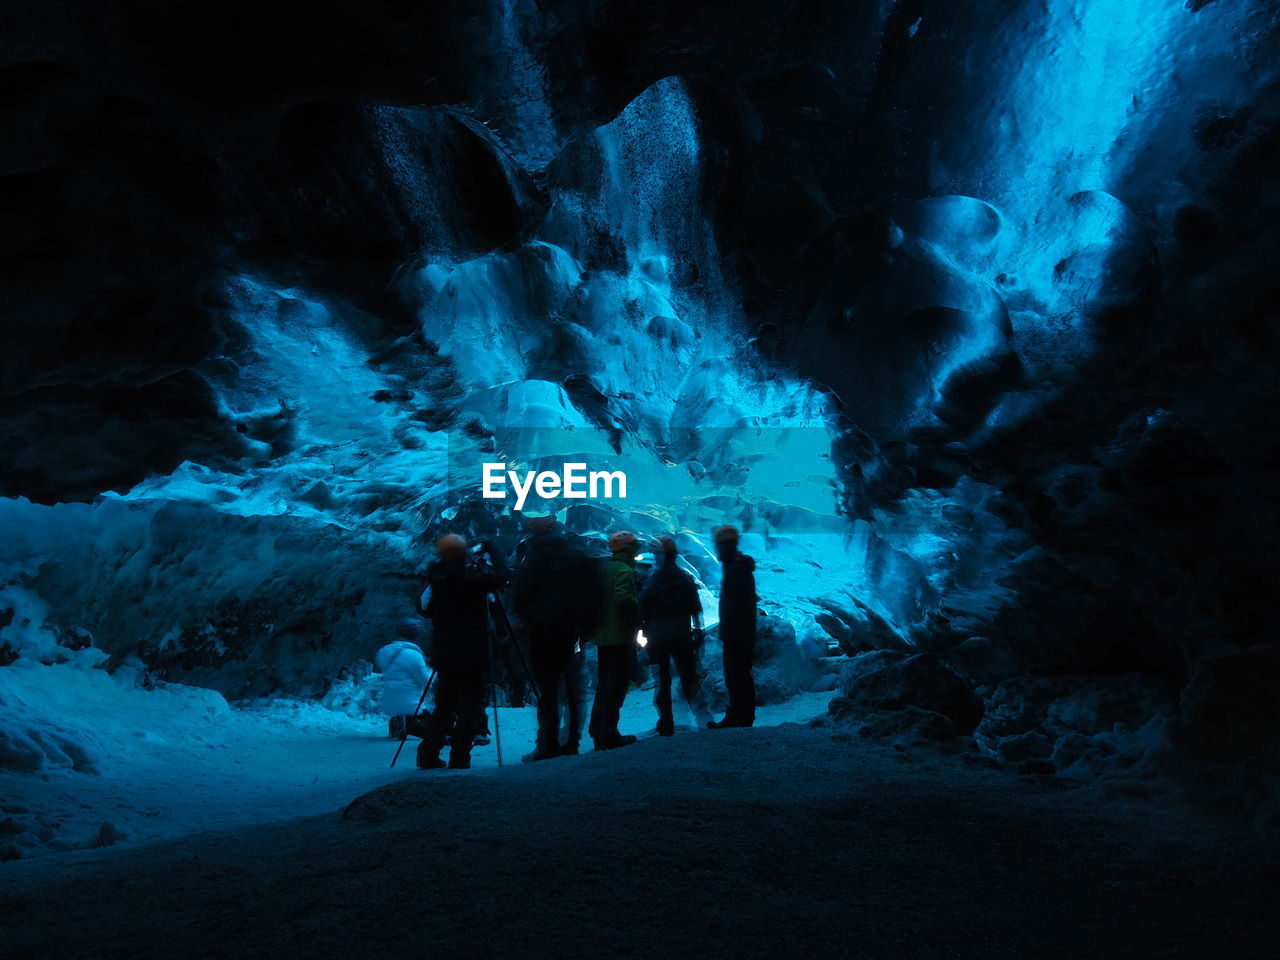 People standing in ice cave